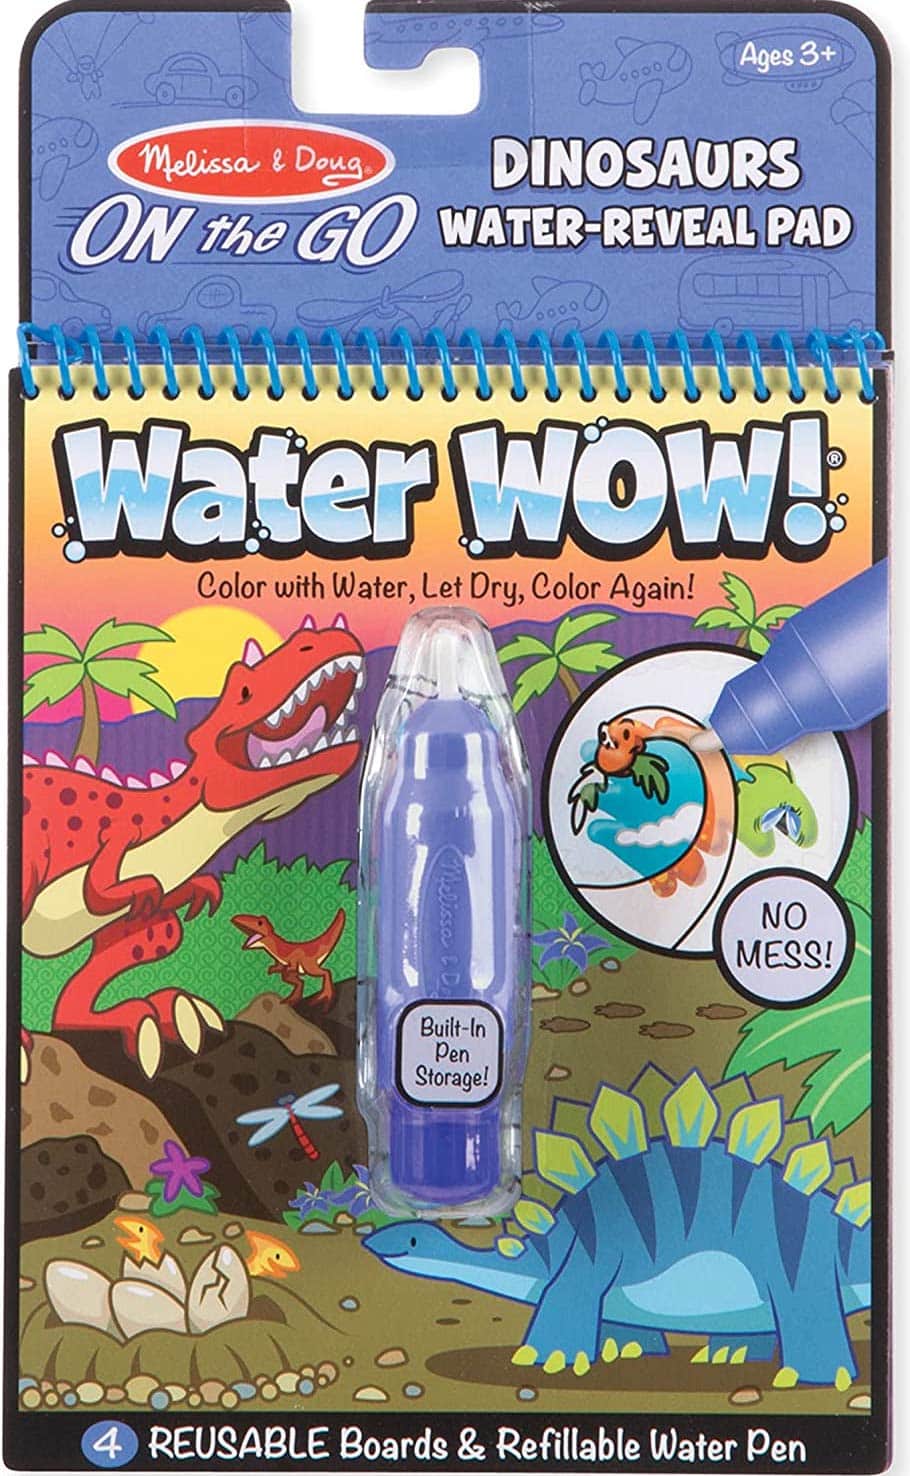 Water Wow Dinosaur book by Melissa and Doug 